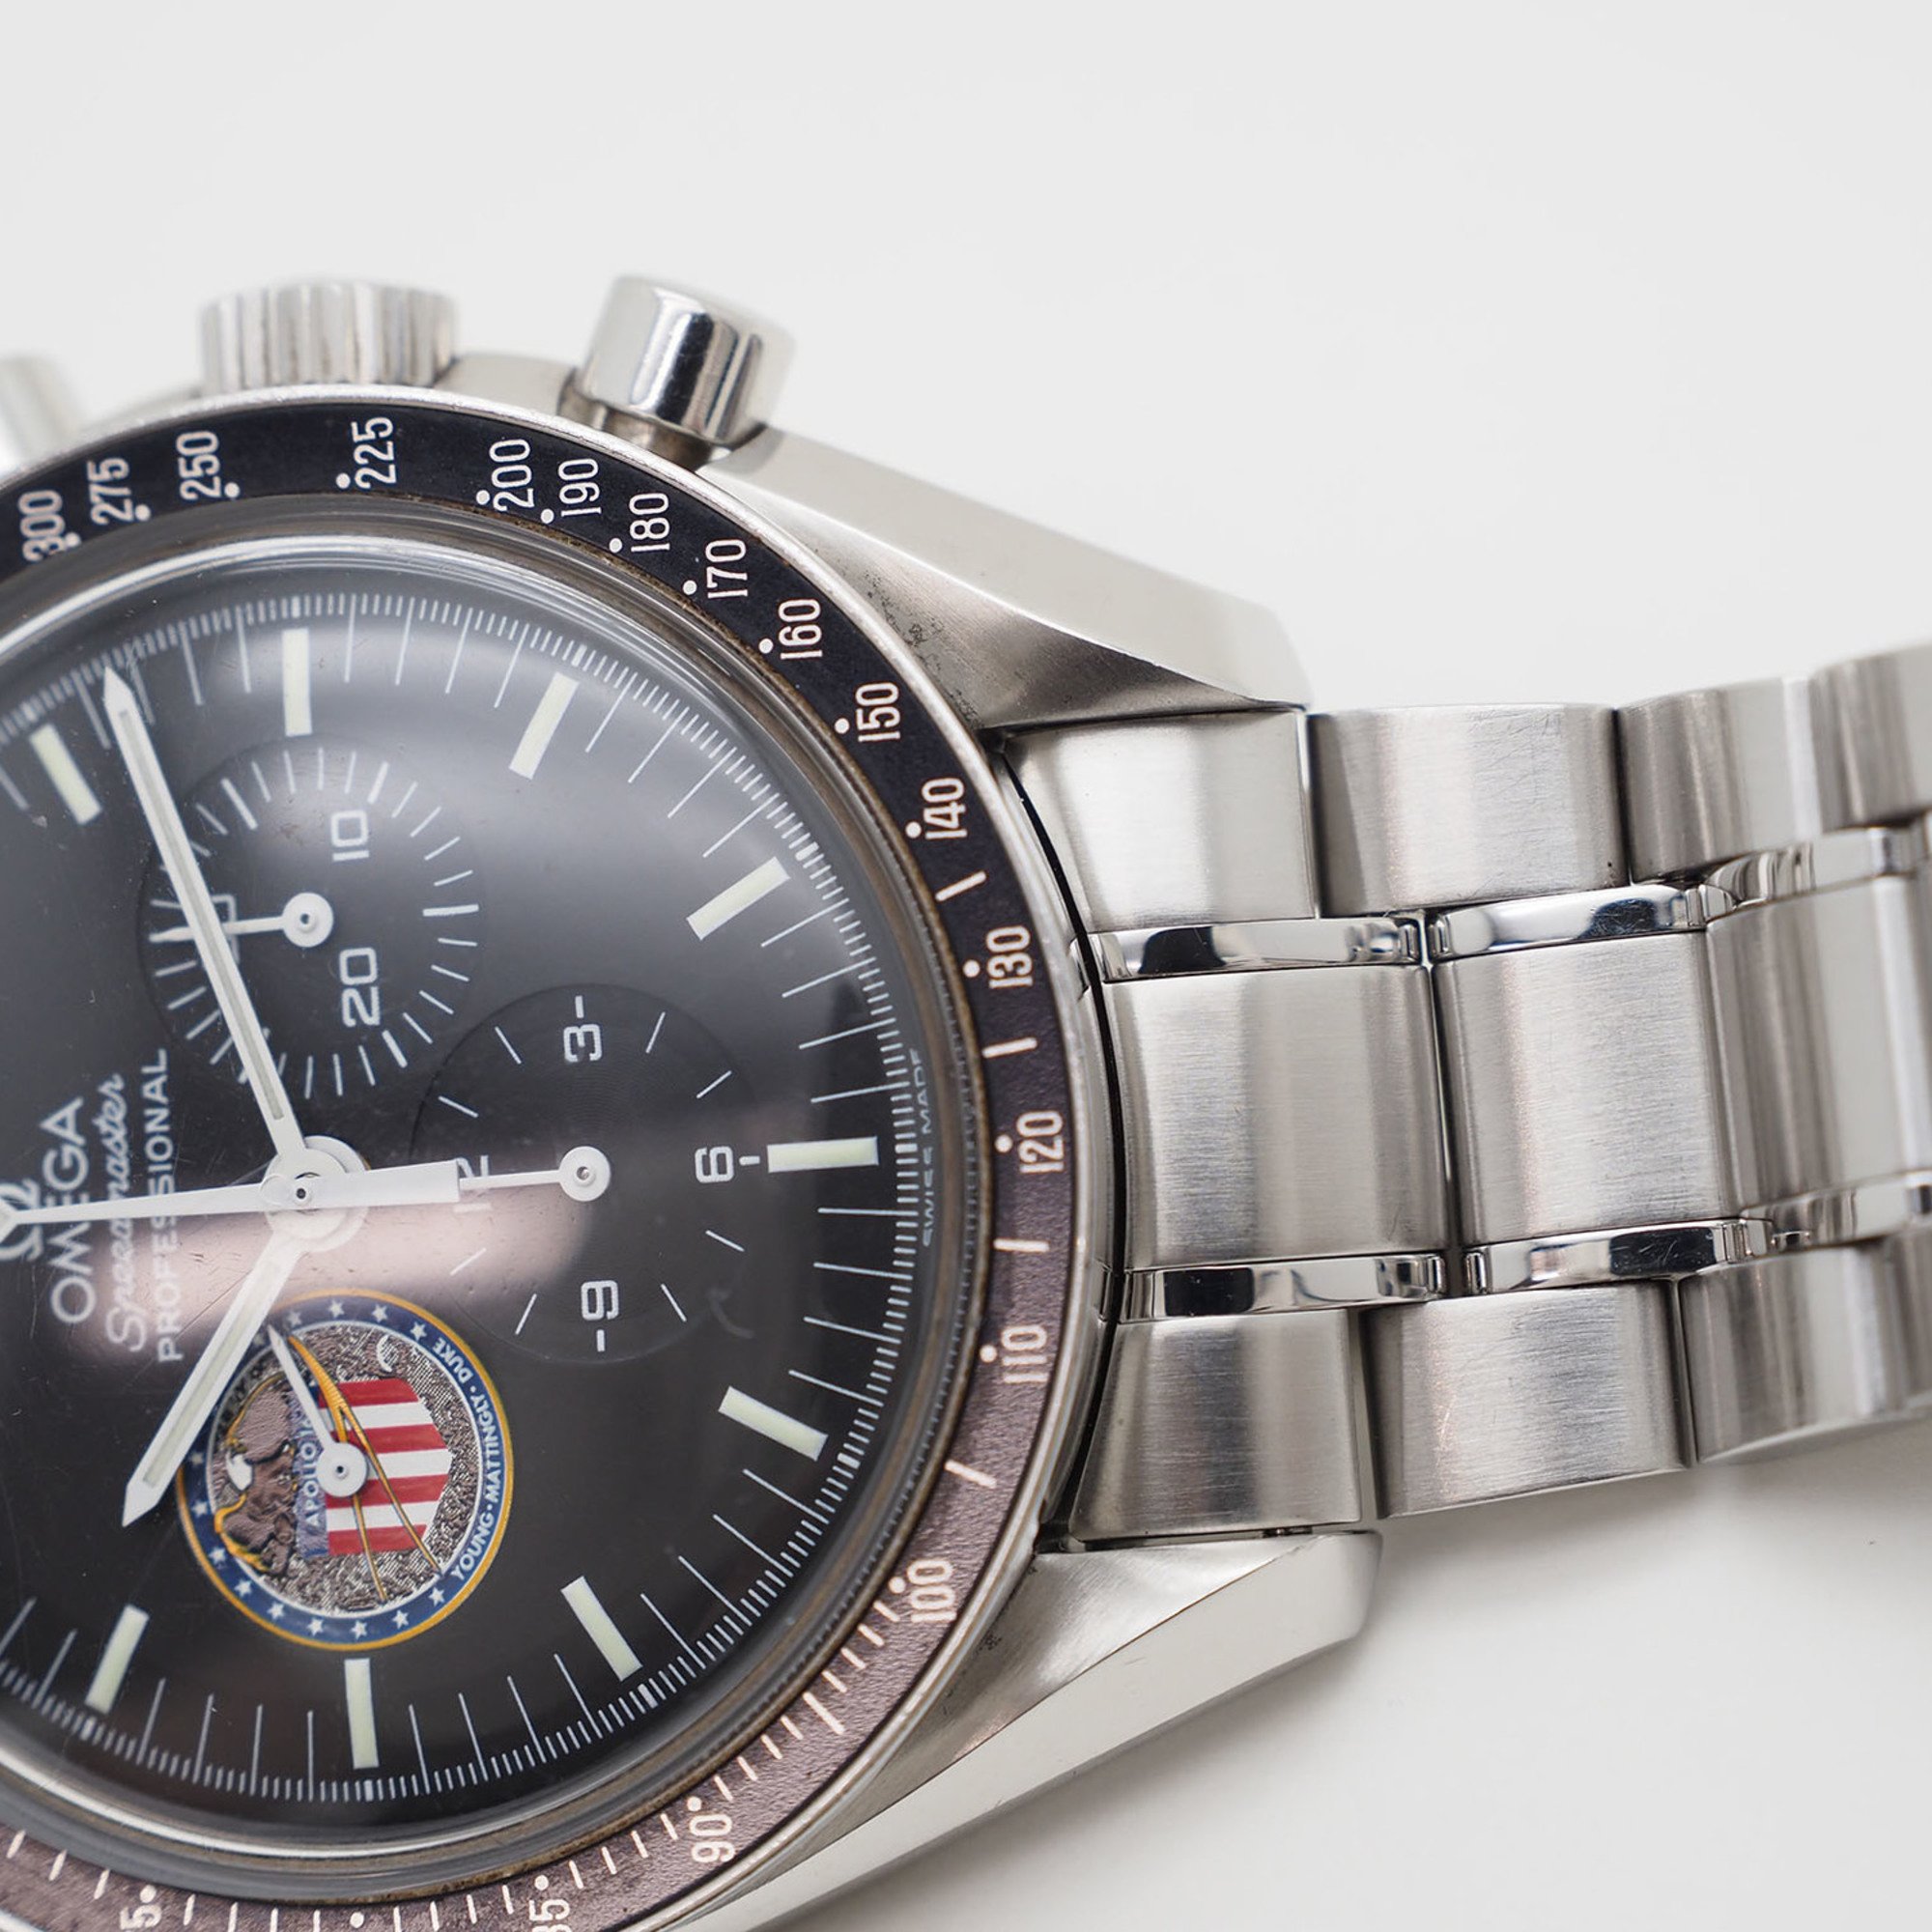 OMEGA Speedmaster Professional Missions Apollo 16 41mm Watch 3597.19 Silver Men's